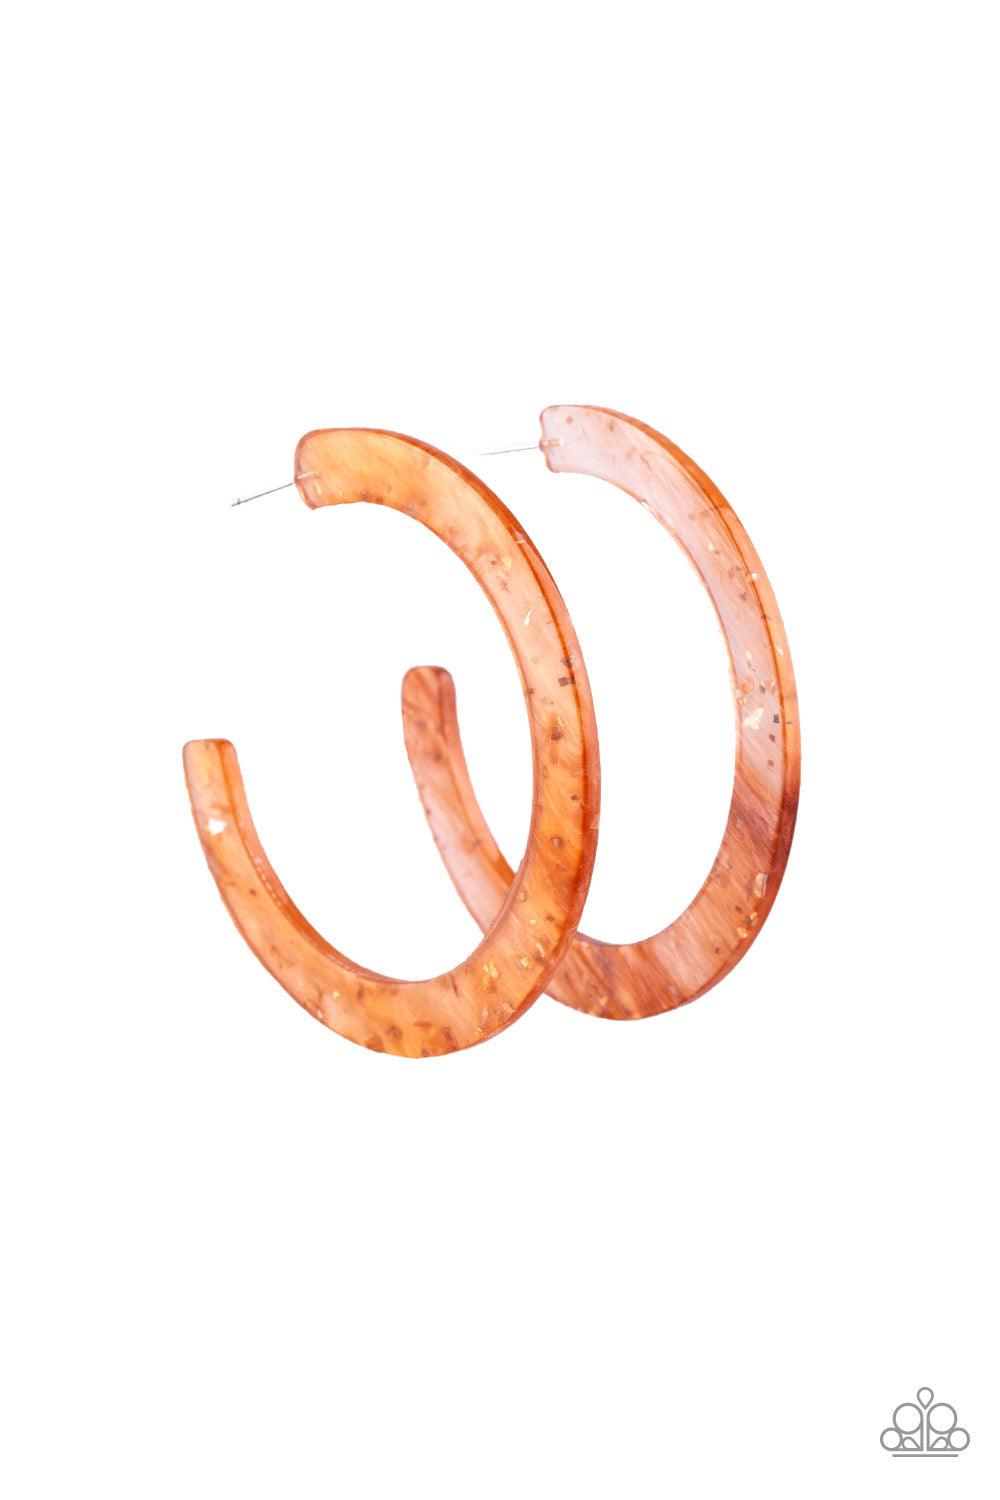 Paparazzi Accessories HAUTE Tamale - Copper Featuring flecks of shimmer, a coppery acrylic hoop curls around the ear for a retro-radiant look. Earring attaches to a standard post fitting. Hoop measures approximately 2 1/4" in diameter. Jewelry